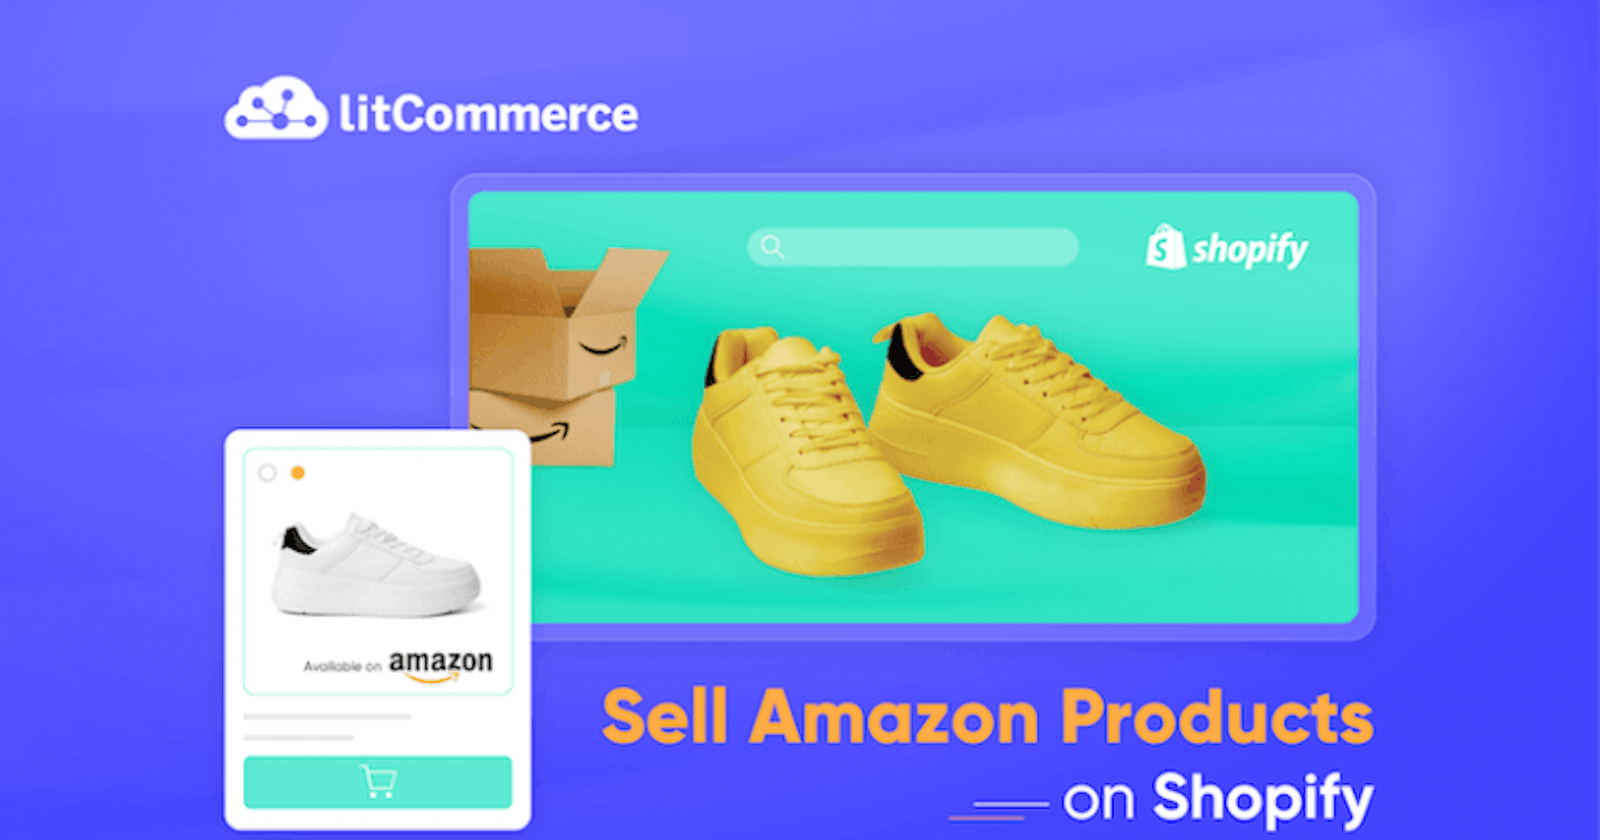 Can I select the Shopify and Amazon integration? What advantages am I receiving?